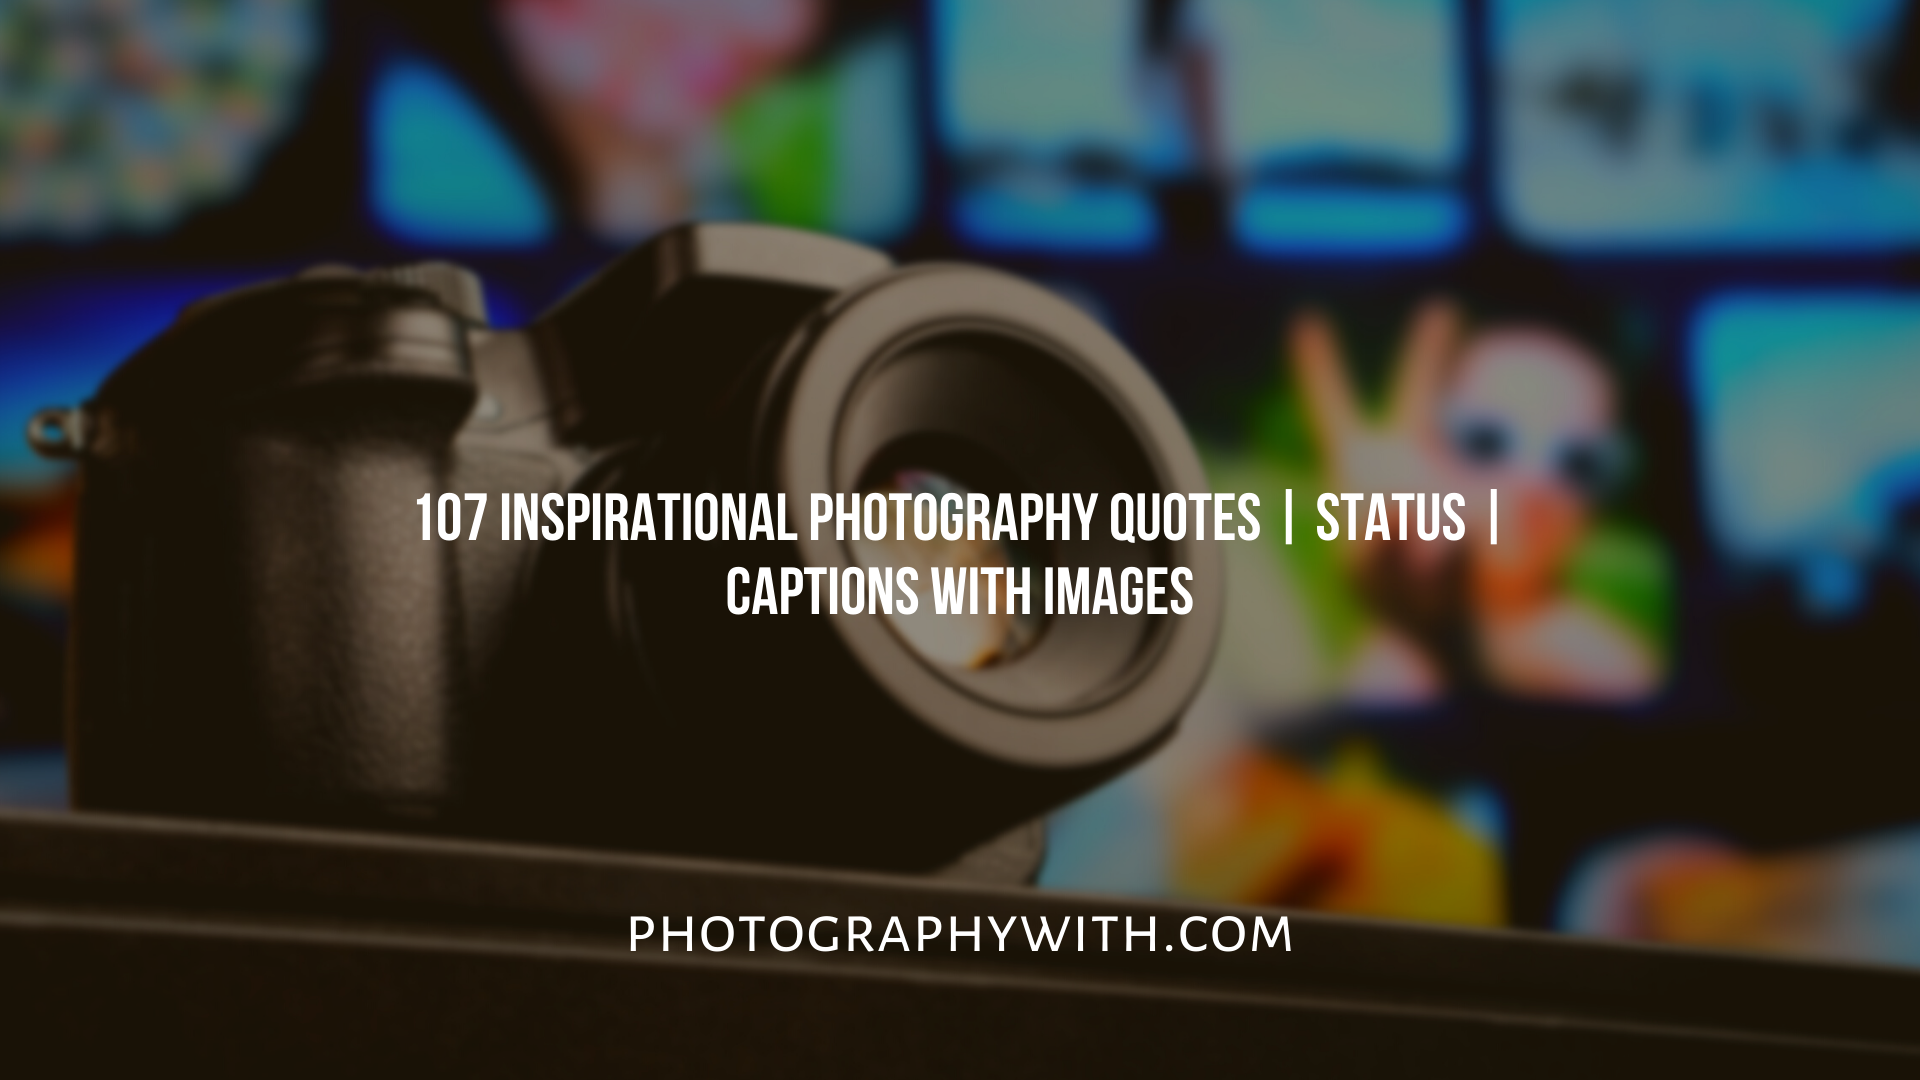 Inspirational Photography quotes